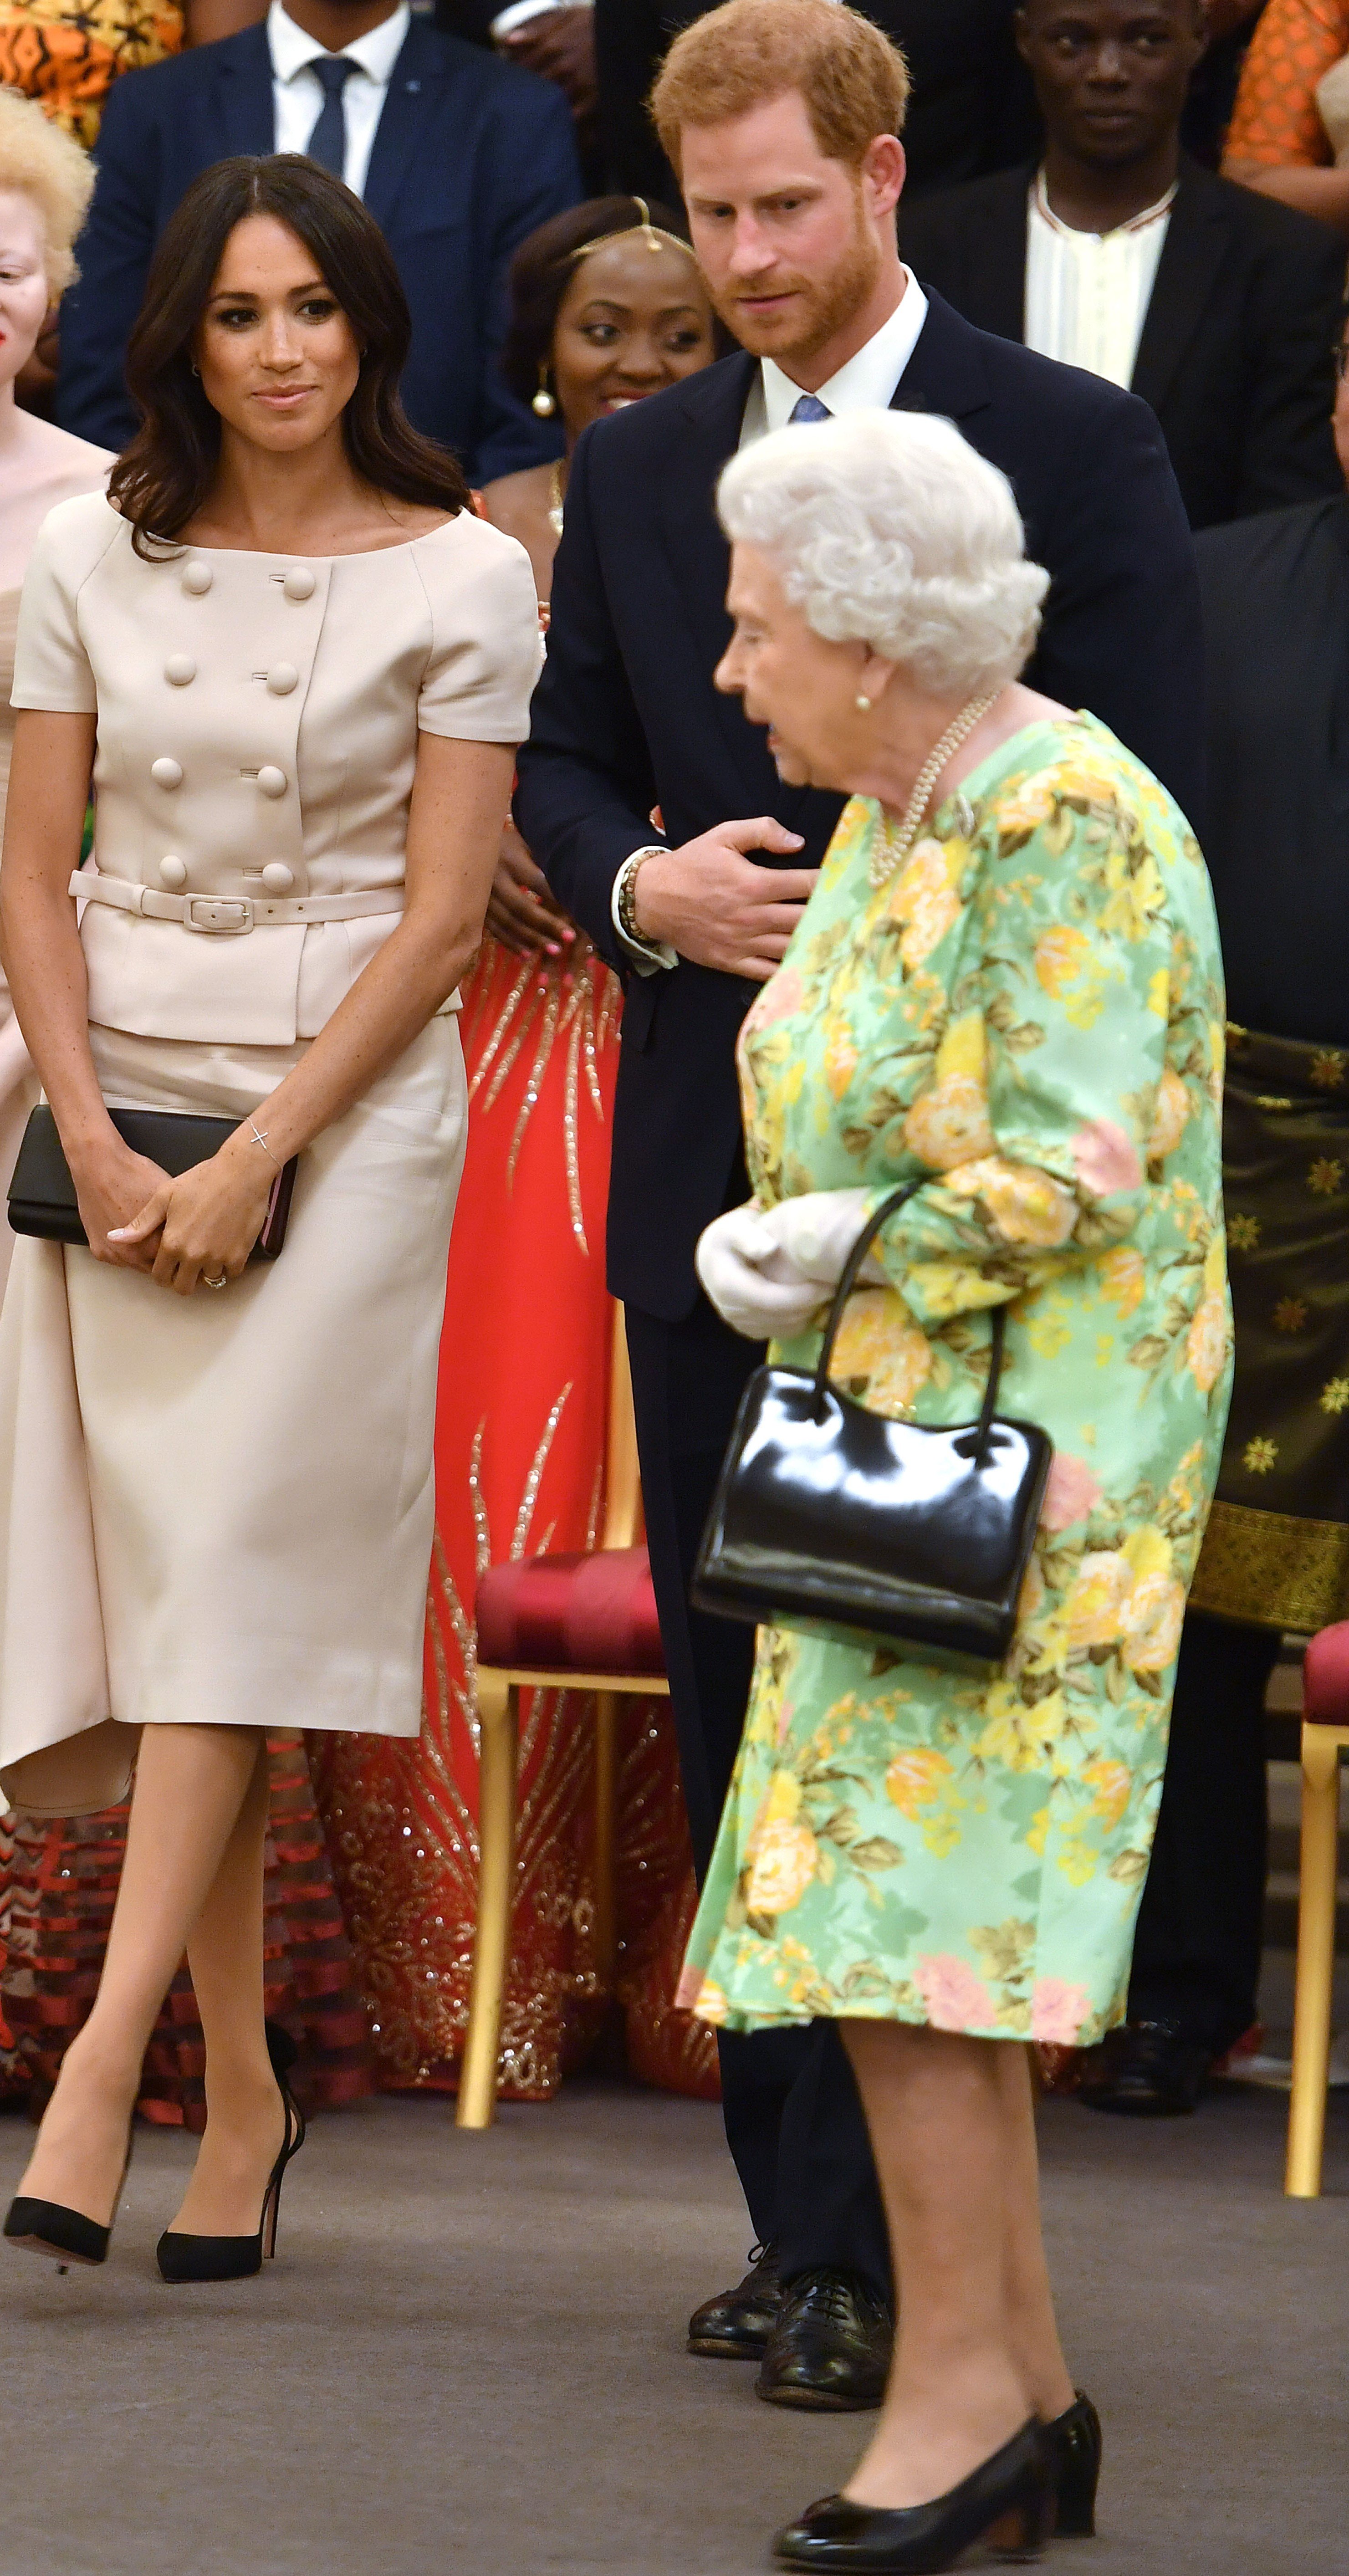 Meghan Markle with Queen Elizabeth II and Prince Harry at the Queen's Young Leaders Awards Ceremony at Buckingham Palace in 2018